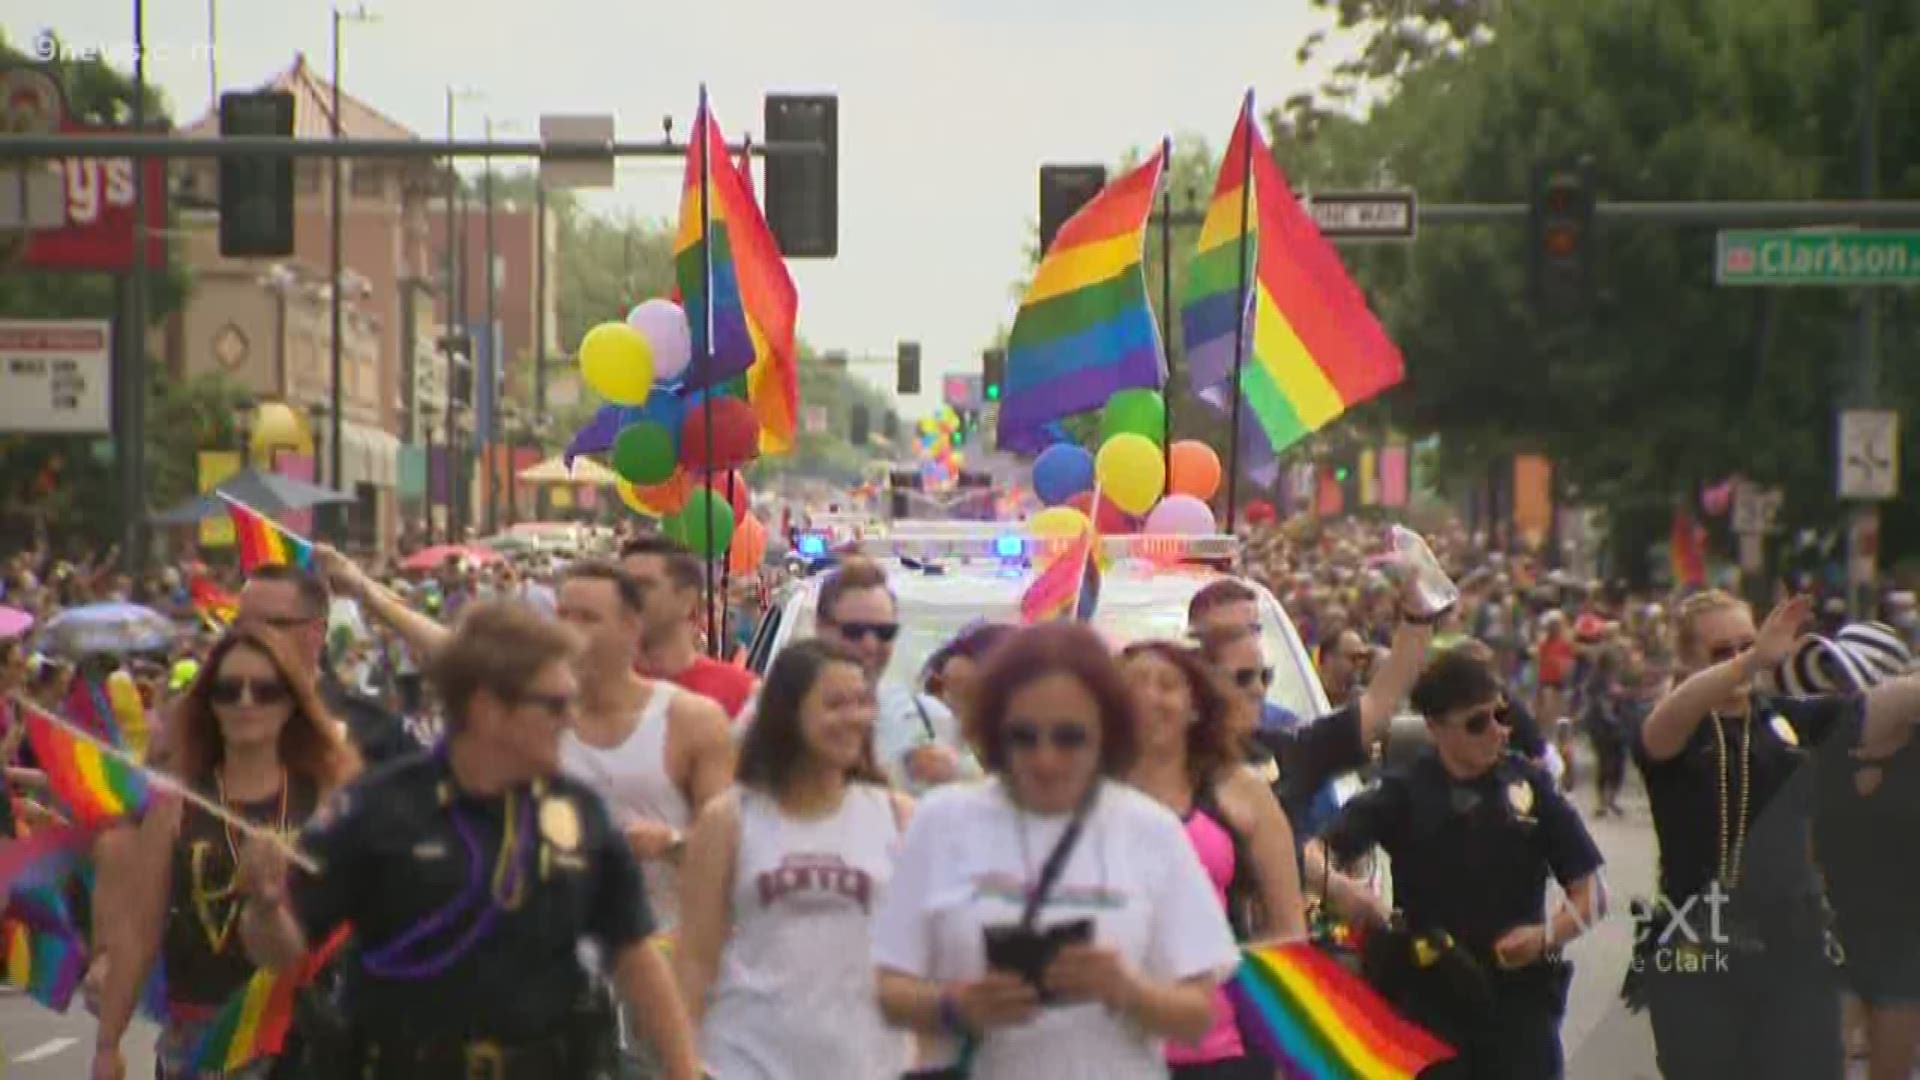 Denver's best-known show of inclusivity - the Pride Parade - excludes one group: craft brewers.